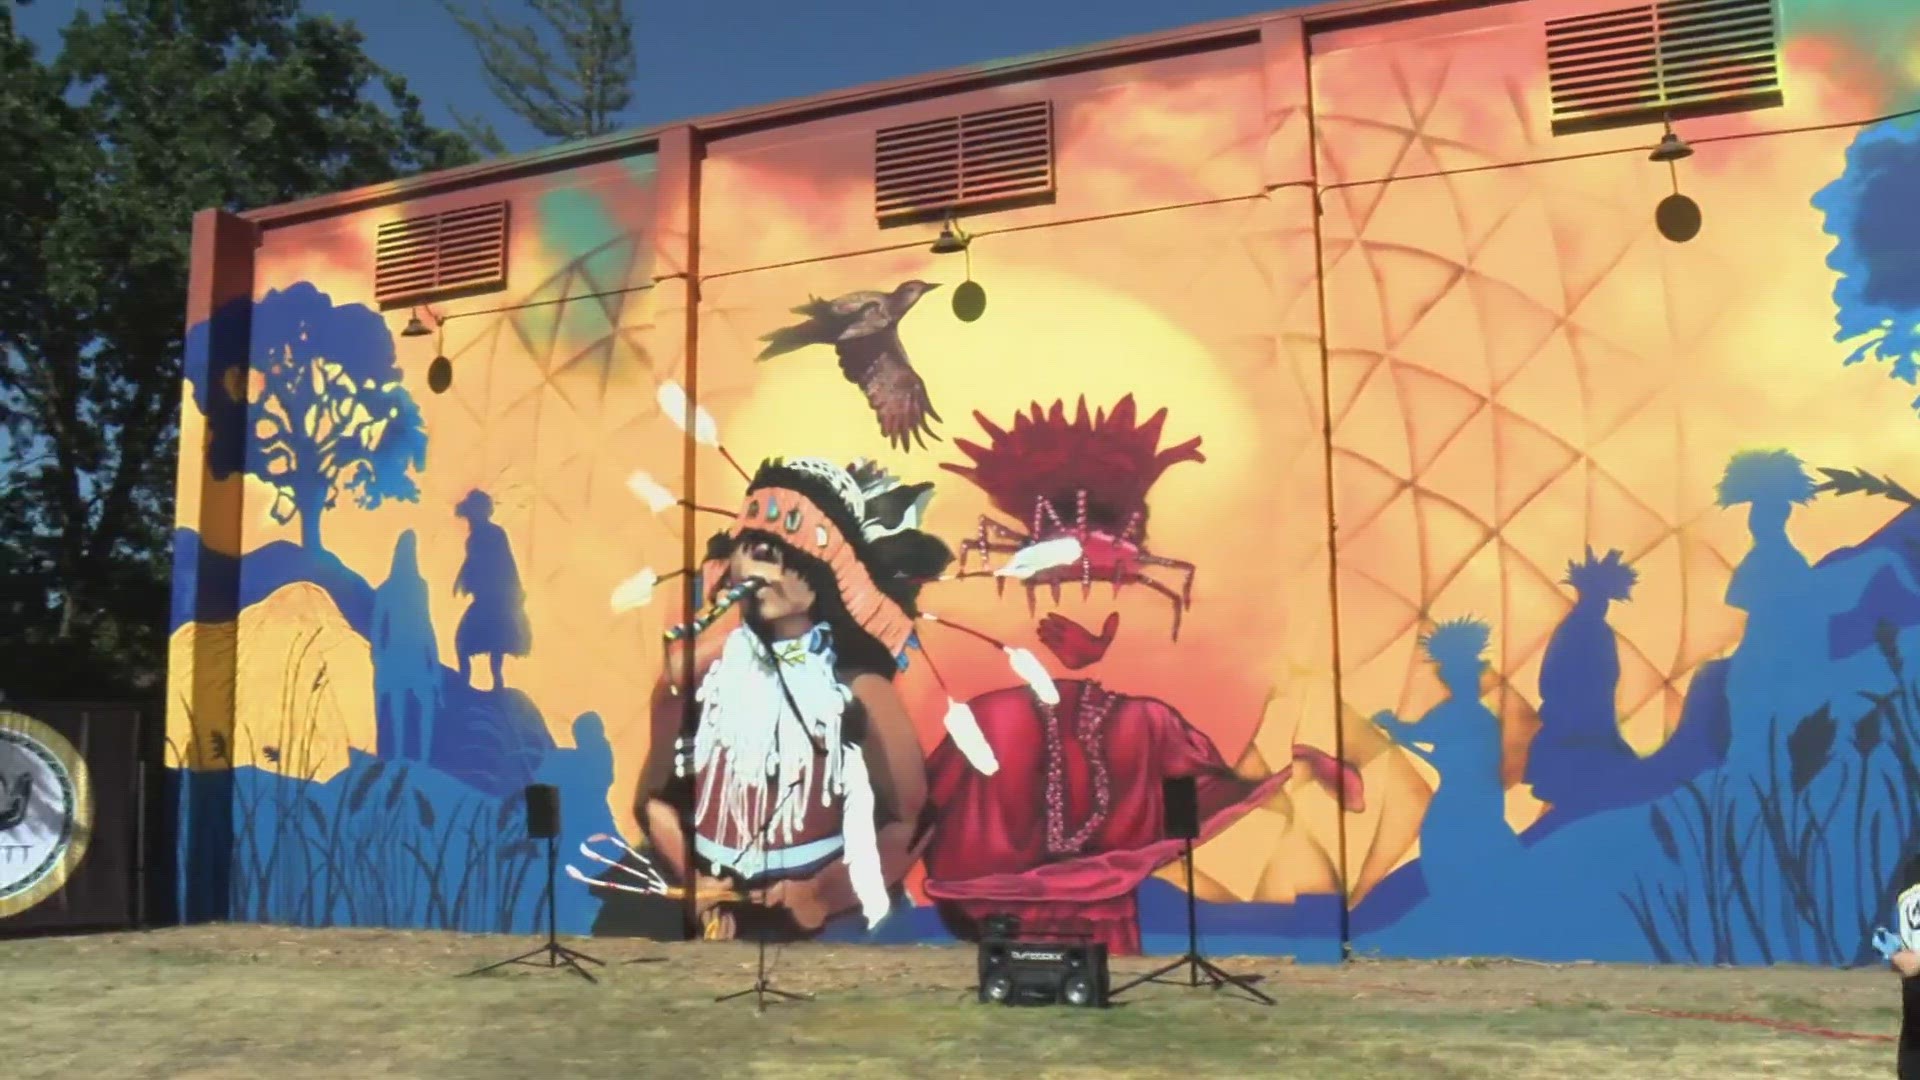 New artwork unveiled in Woodland is celebrating the local Native American community